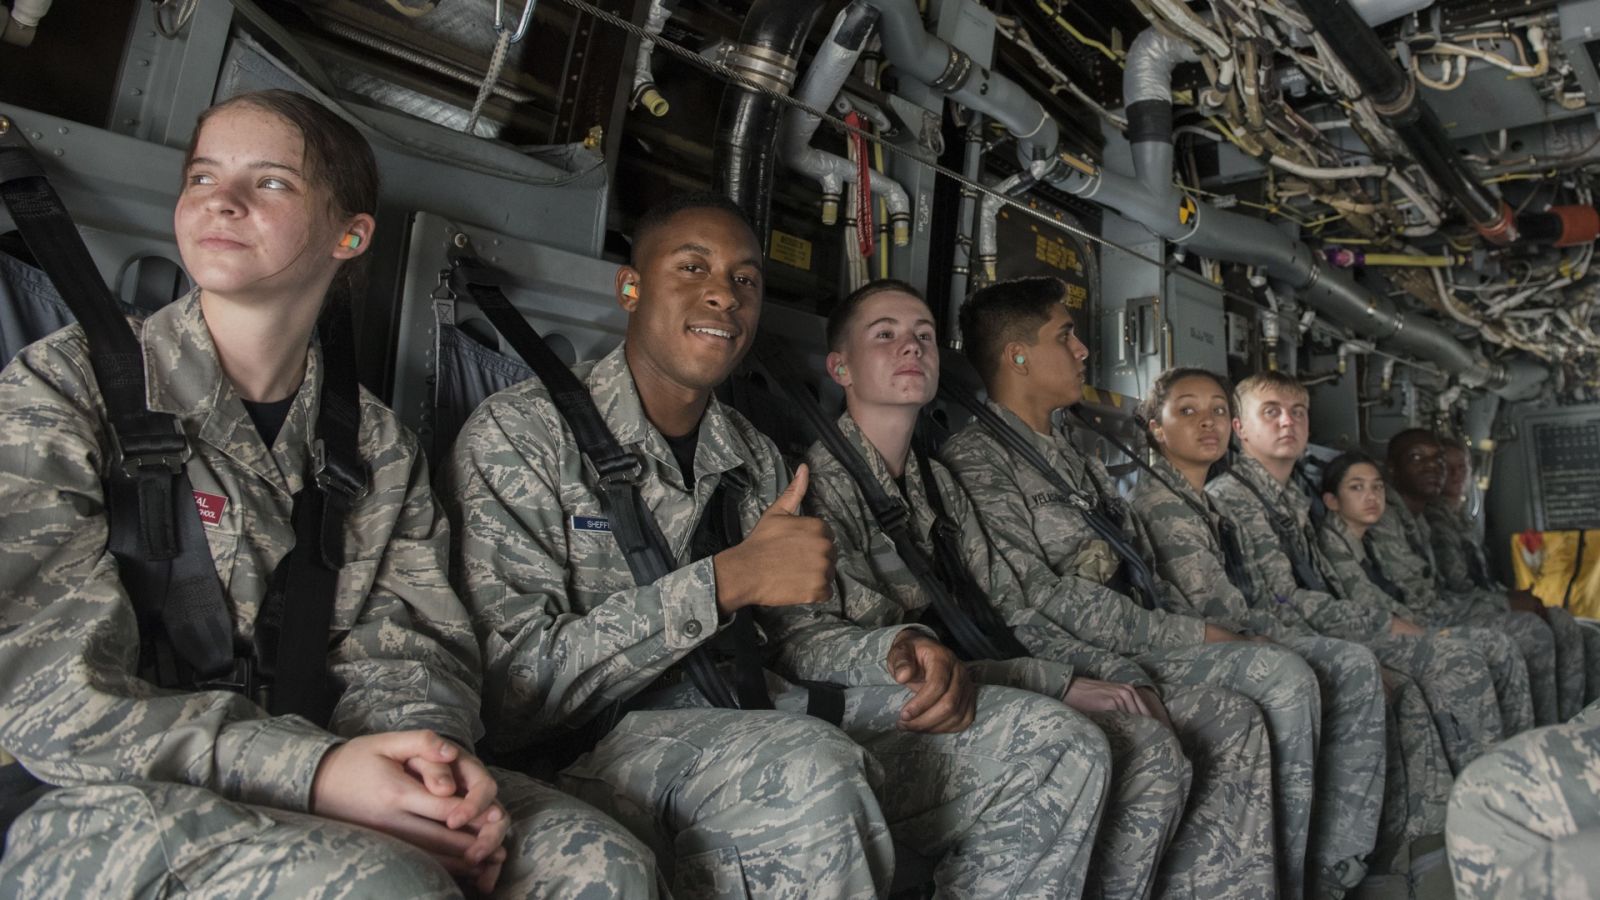 Air Force Junior ROTC cadets take a familiarization flight in a 1st Special Operations Wing aircraft at Hurlburt Field, Fla., June 27, 2017. (Photo by Airman 1st Class Joseph Pick / courtesy U.S. Air Force)